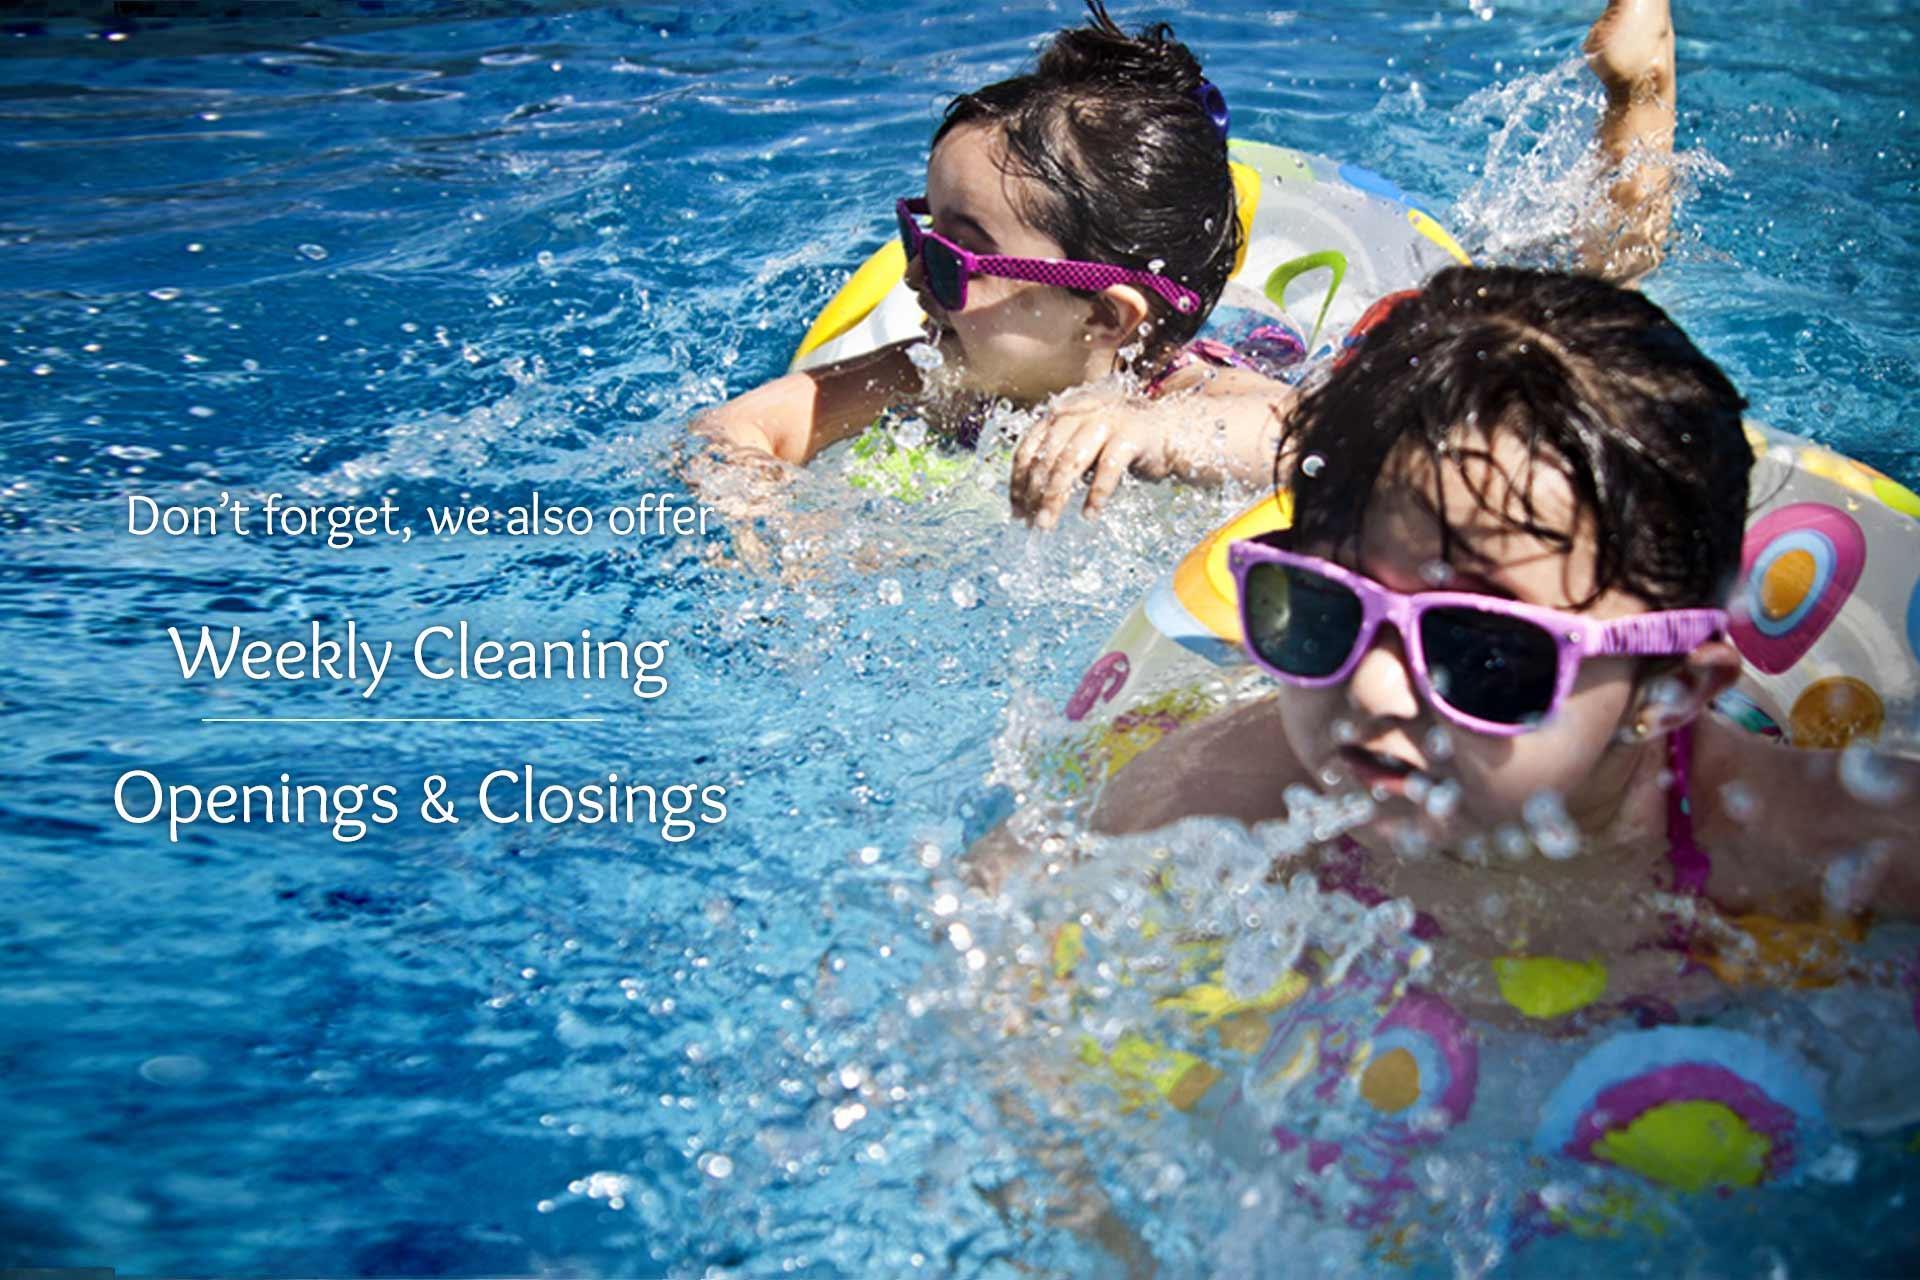 Weekly maintenance and pool chemical supply from Peek Pools